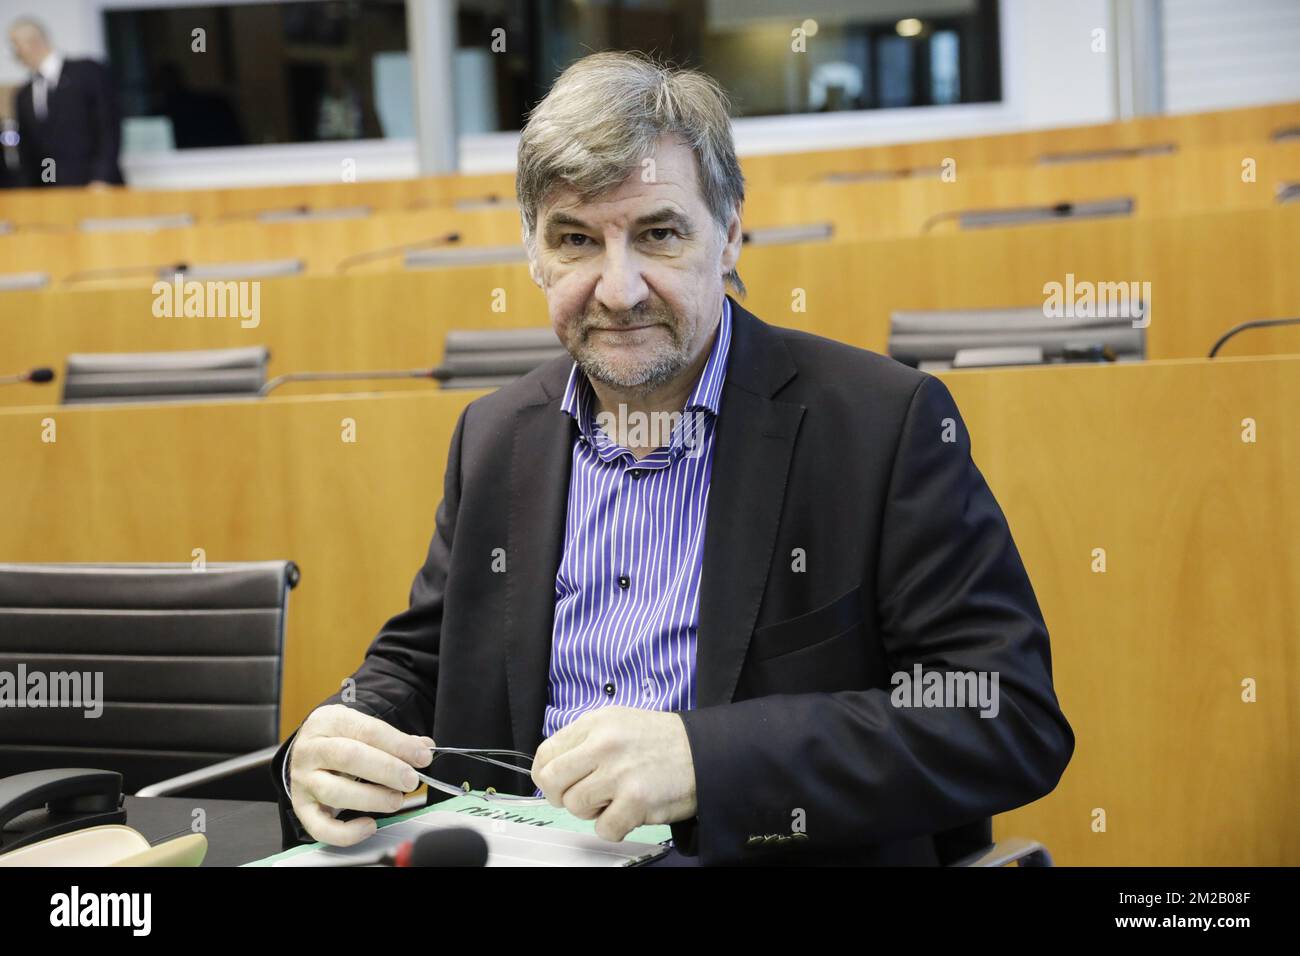 N-VA's Wilfried Vandaele pictured during a dialogue session between parliament of the Brussels Region, Flemish parliament and Walloon parliament on climate ahead of COP23 climate top in Bonn later this month, in Brussels, Monday 13 November 2017. BELGA PHOTO THIERRY ROGE Stock Photo